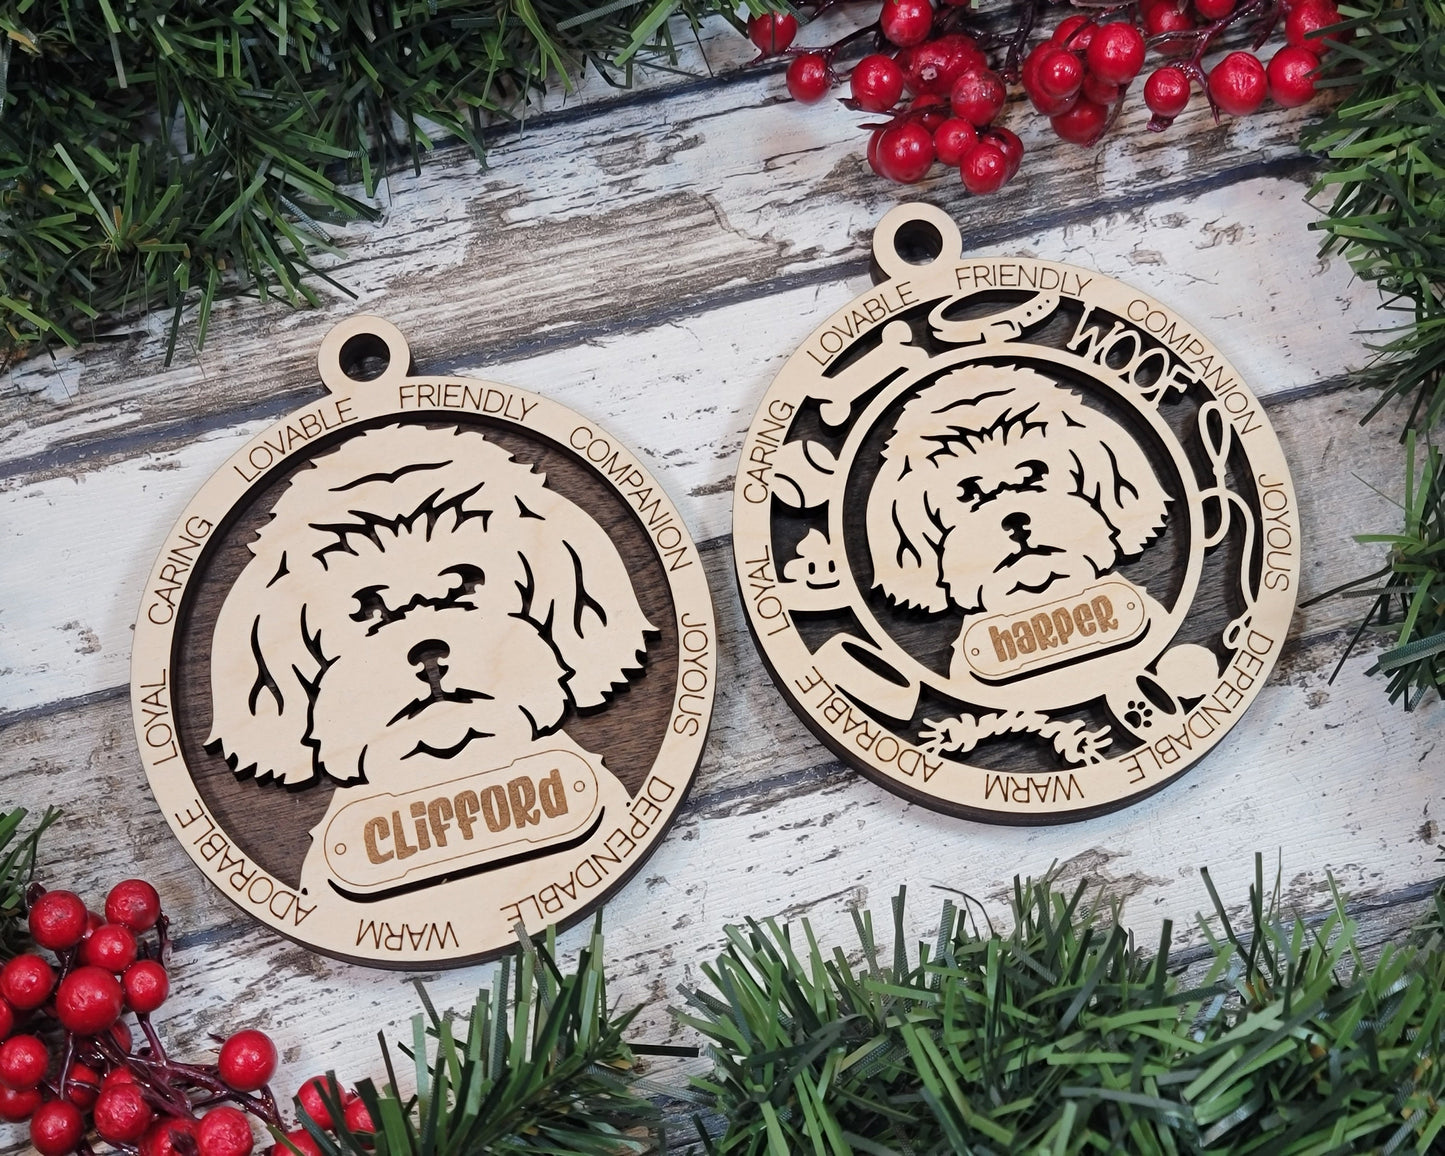 Maltipoo - Adorable Dog Ornaments - 2 Ornaments included - SVG, PDF, AI File Download - Sized for Glowforge